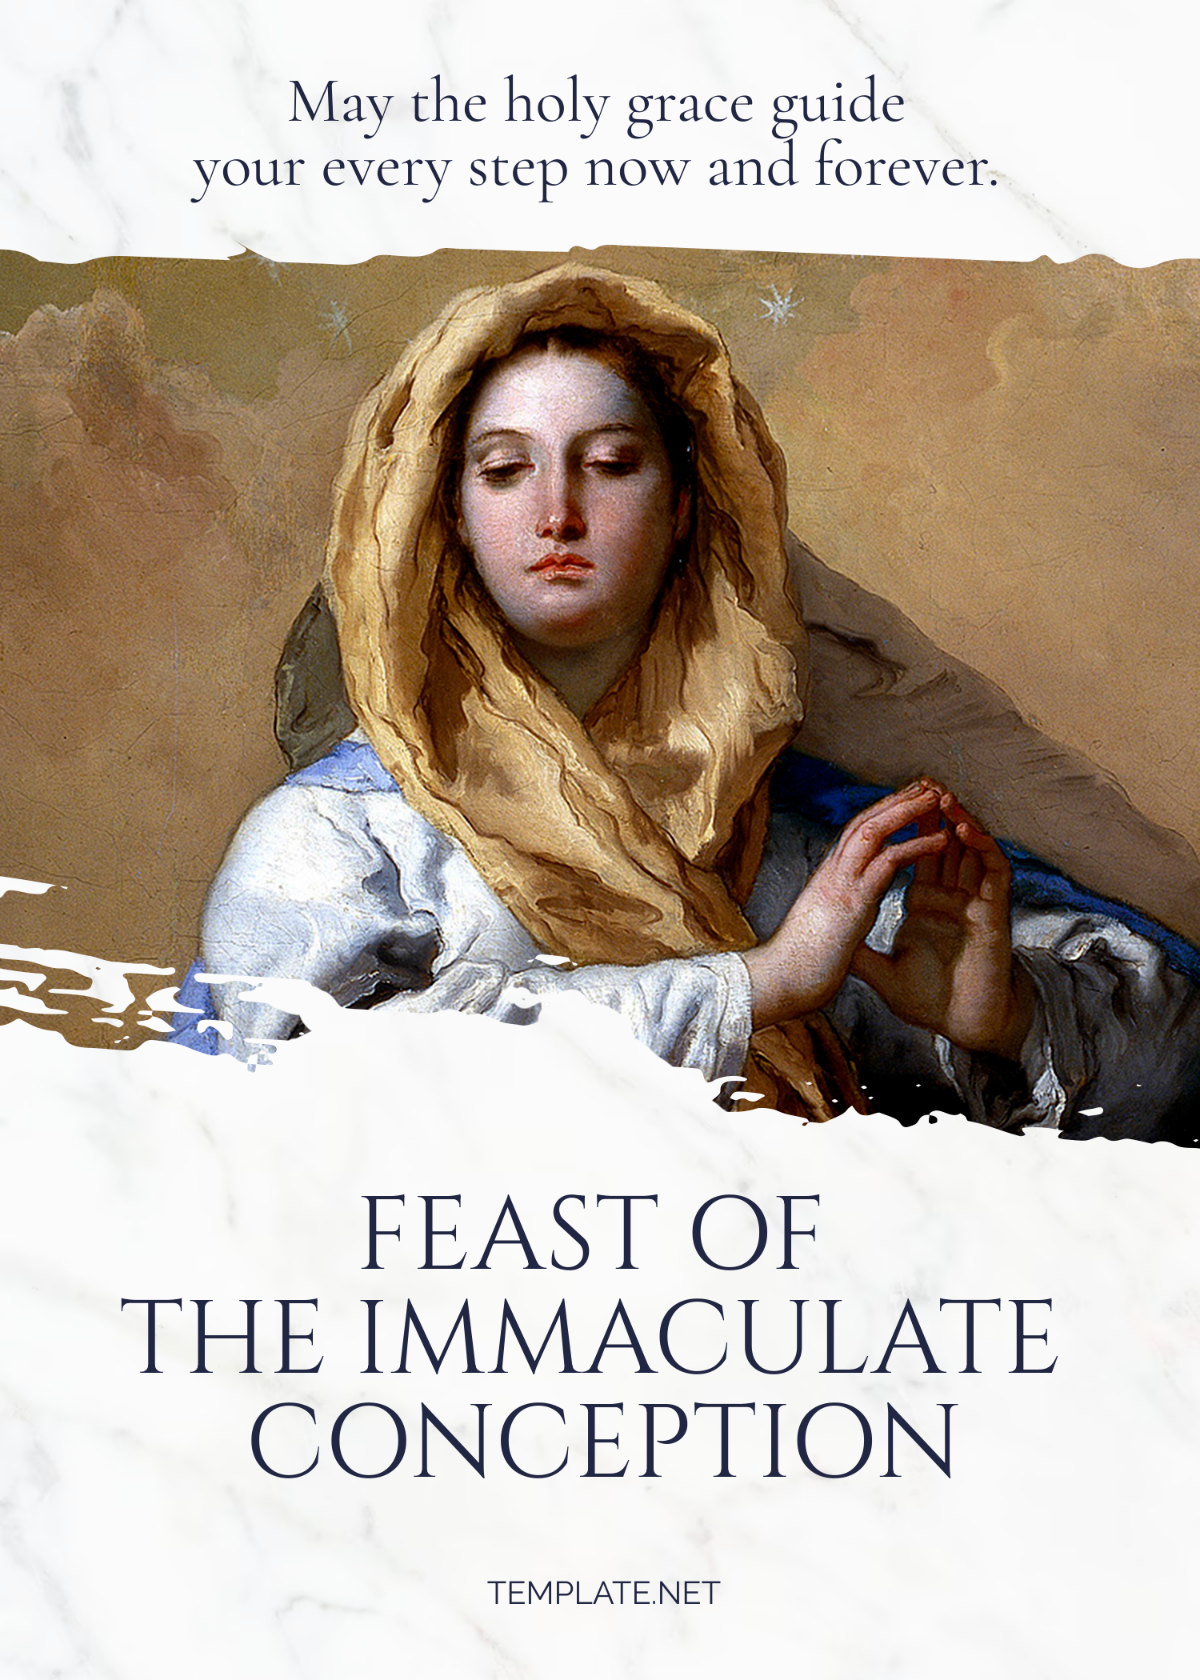 Feast of the Immaculate Conception Greeting Template